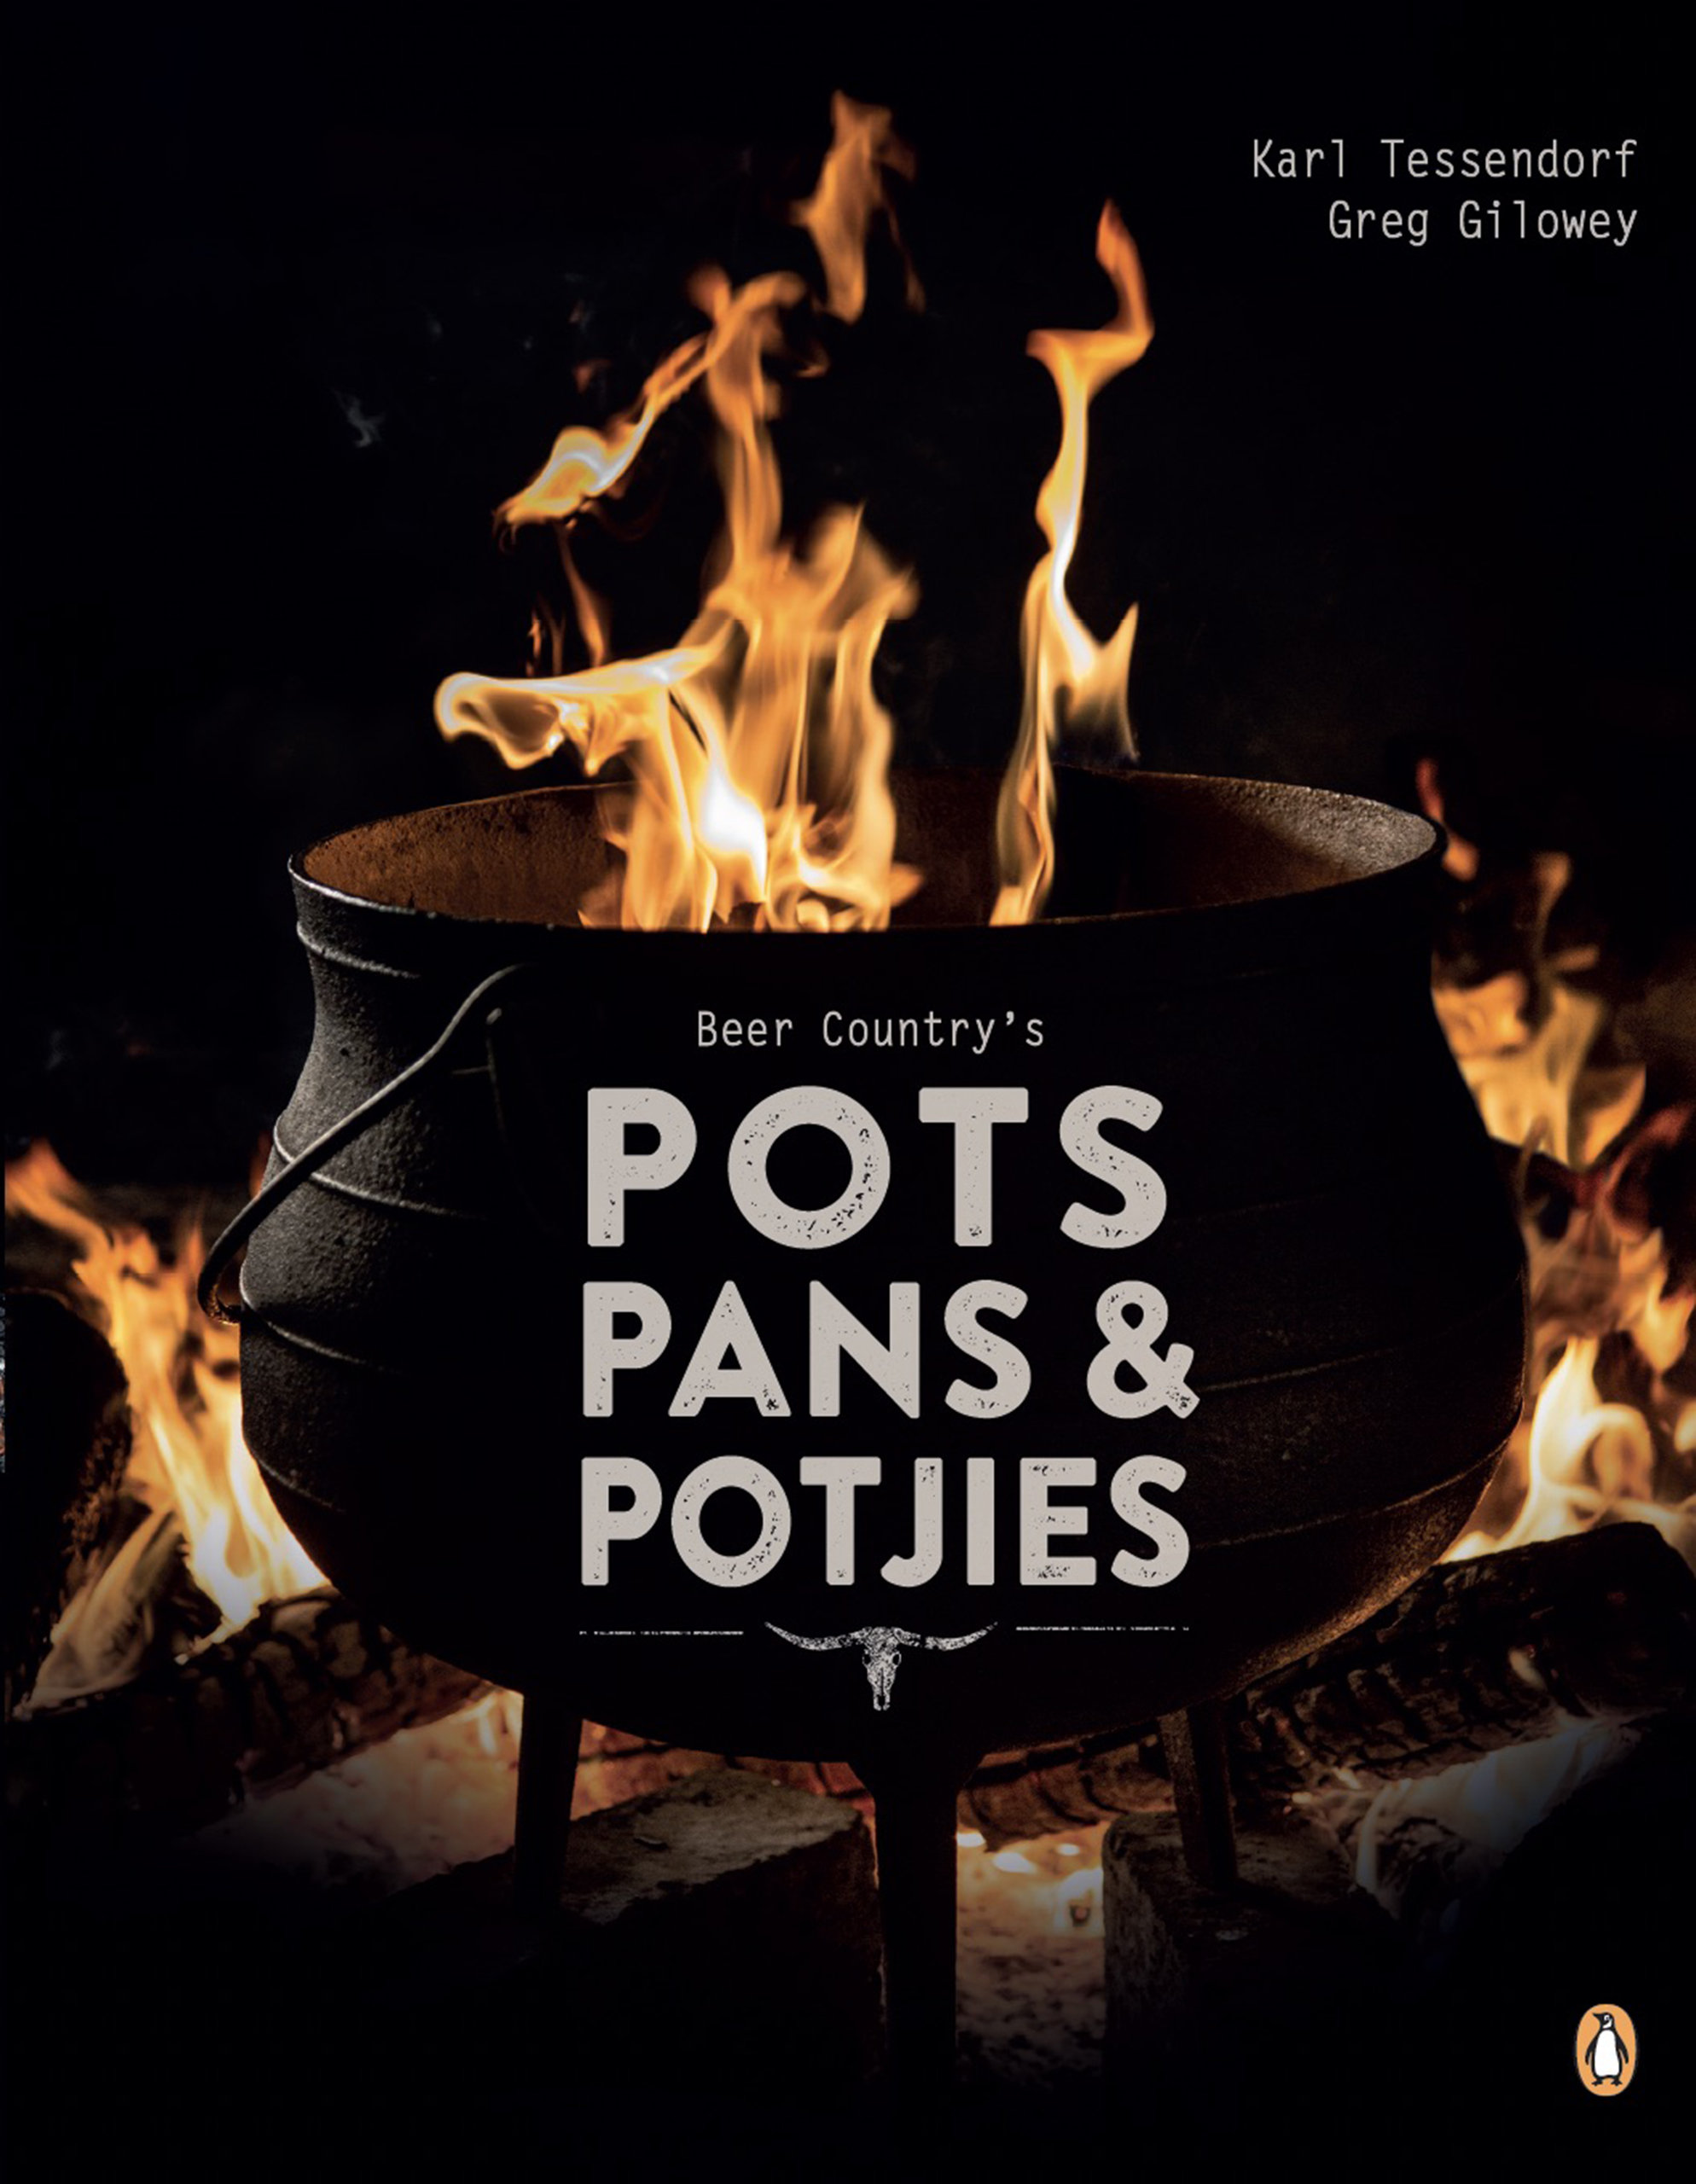 Beer Country’s Pots, Pans and Potjies